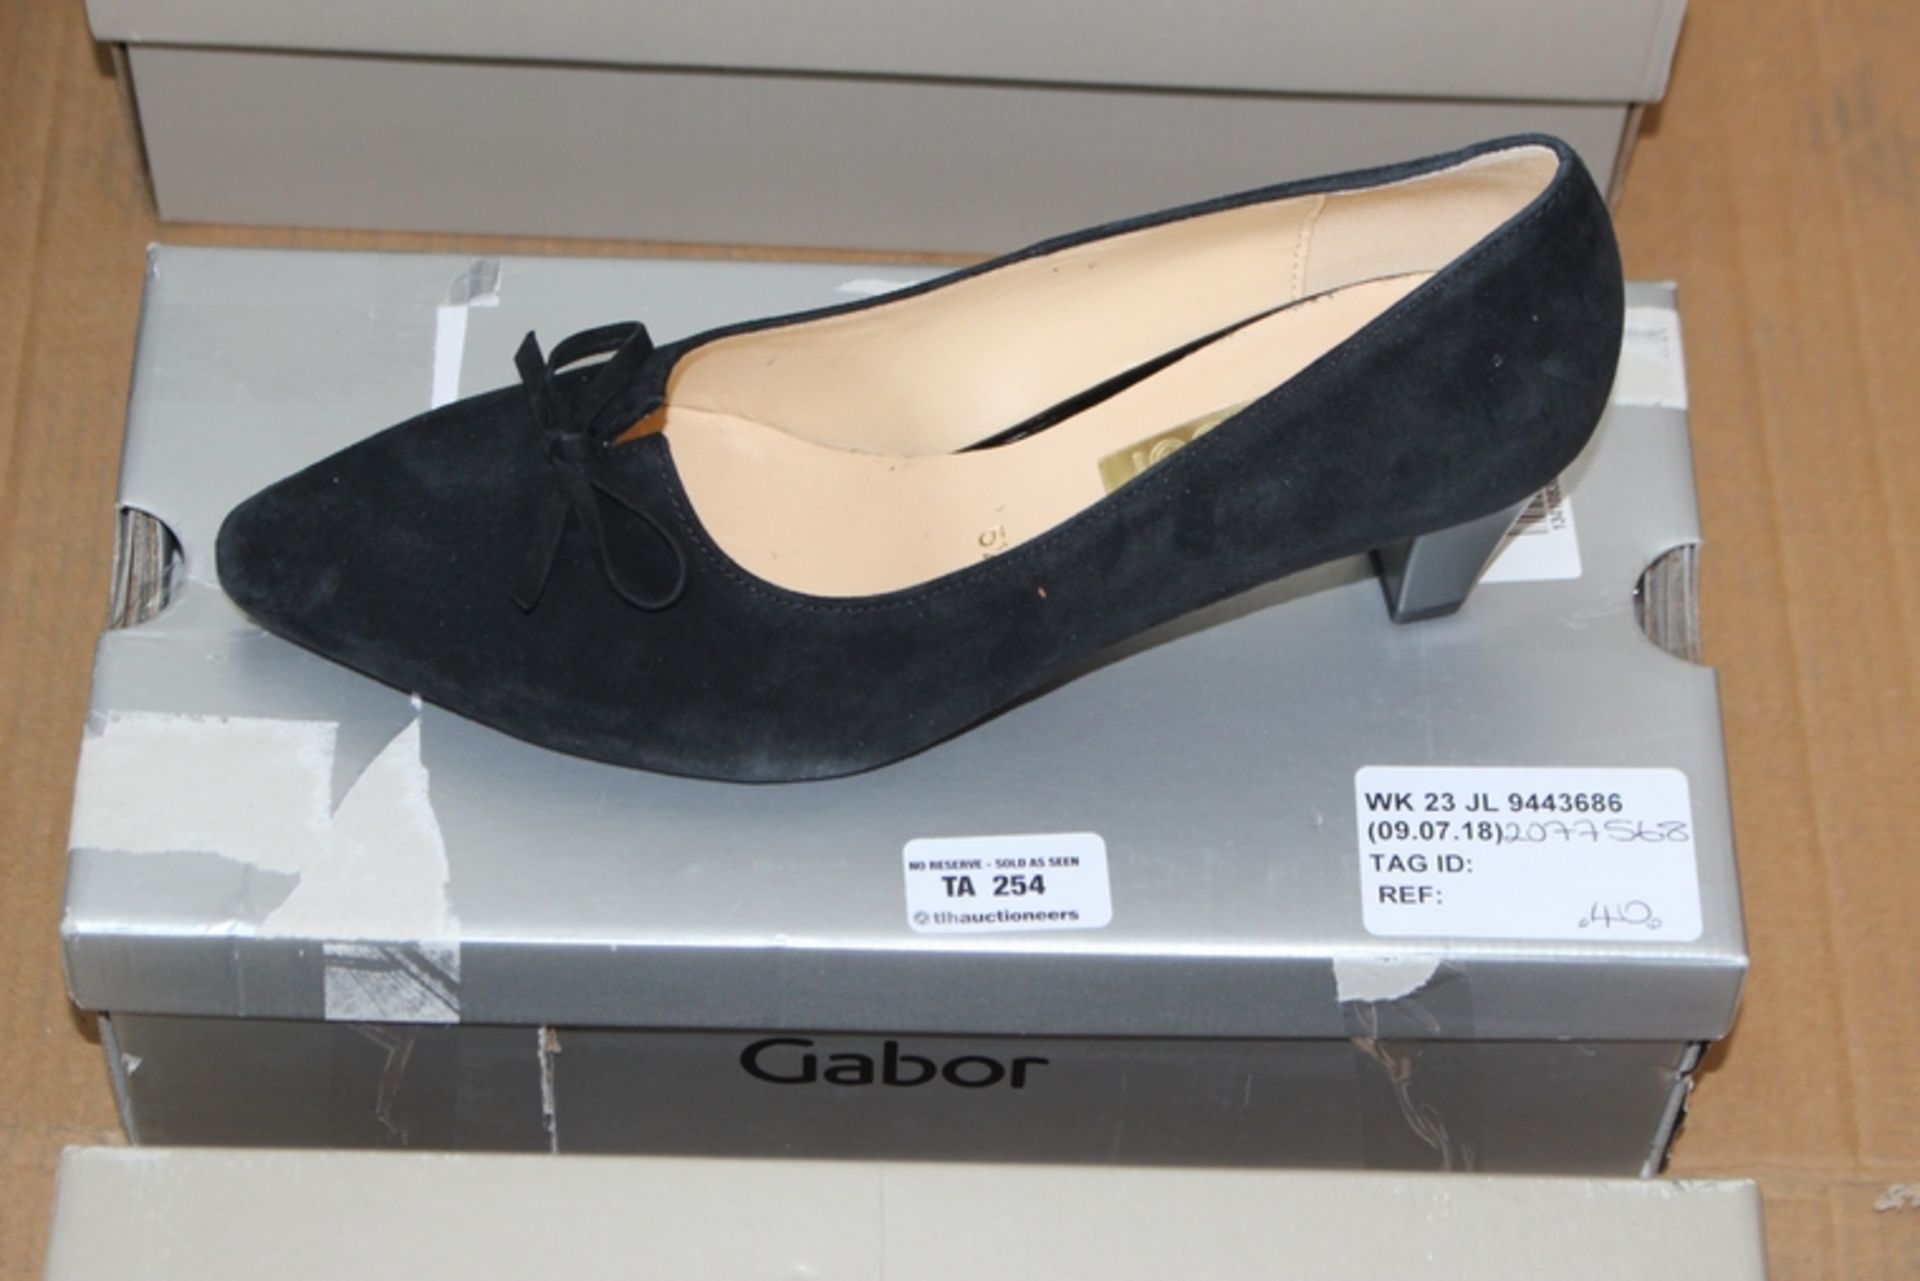 1X PAIR OF GABOR LADIES HEELED SHOES SIZE 5.5 RRP £100 (09.07.18) (2077568)